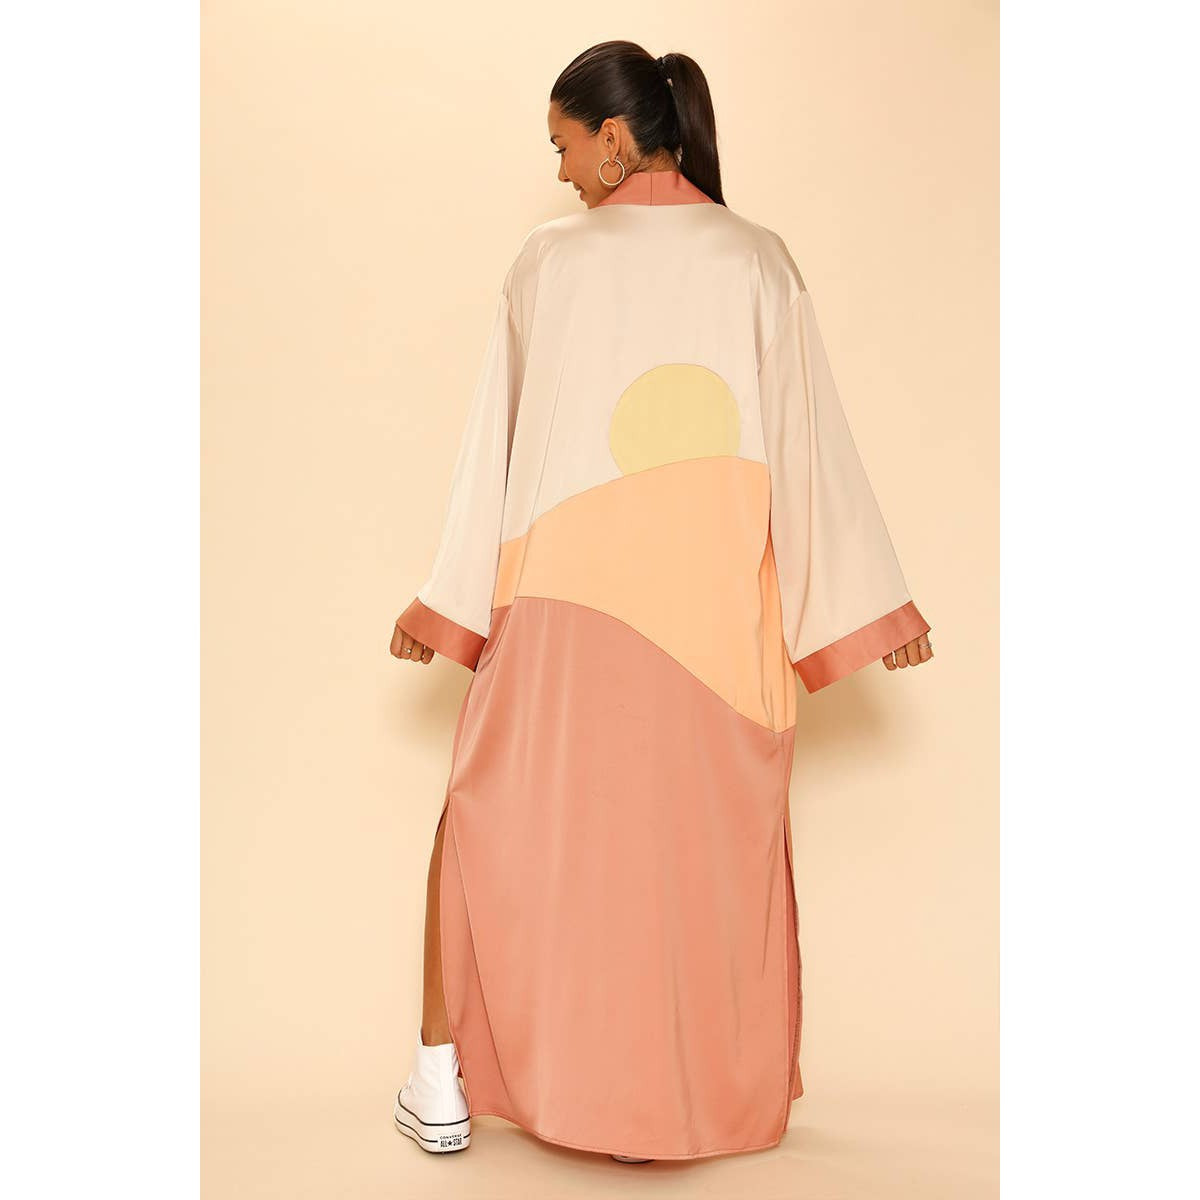 Miss Sparkling Sunset Kimono Big Long Textured Satin Duster in Dusty Coral | Light Jacket, Outdoor Robe, Swimsuit Coverup | Sizes L-XL